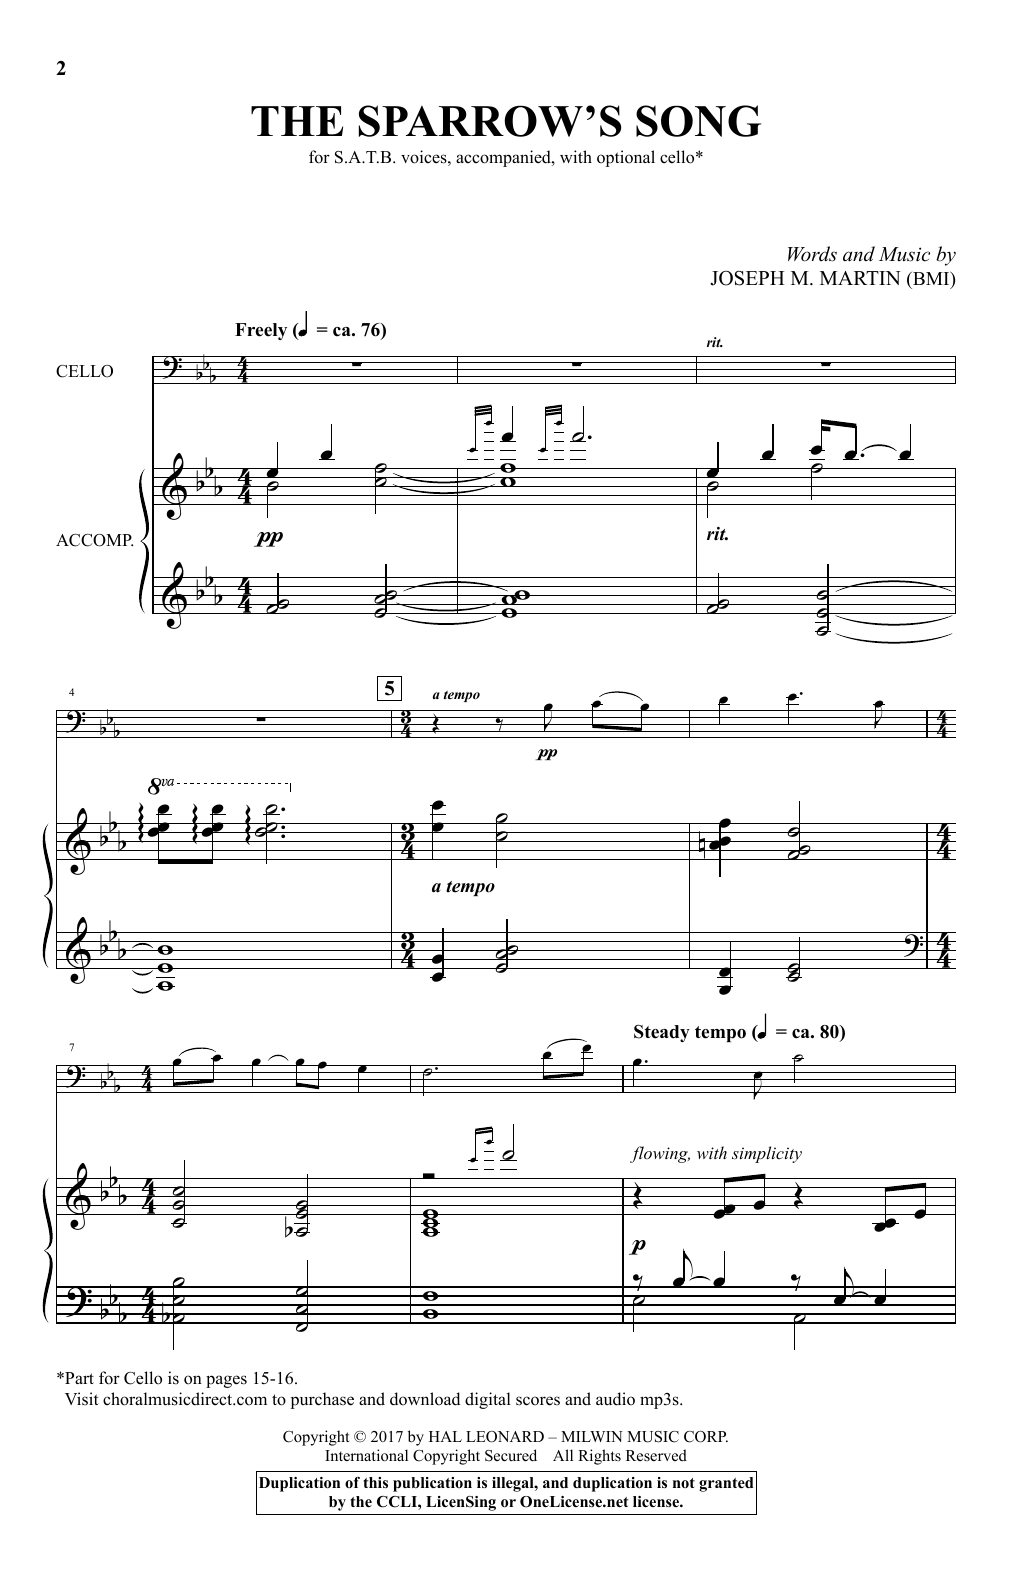 Download Joseph M. Martin The Sparrow's Song Sheet Music